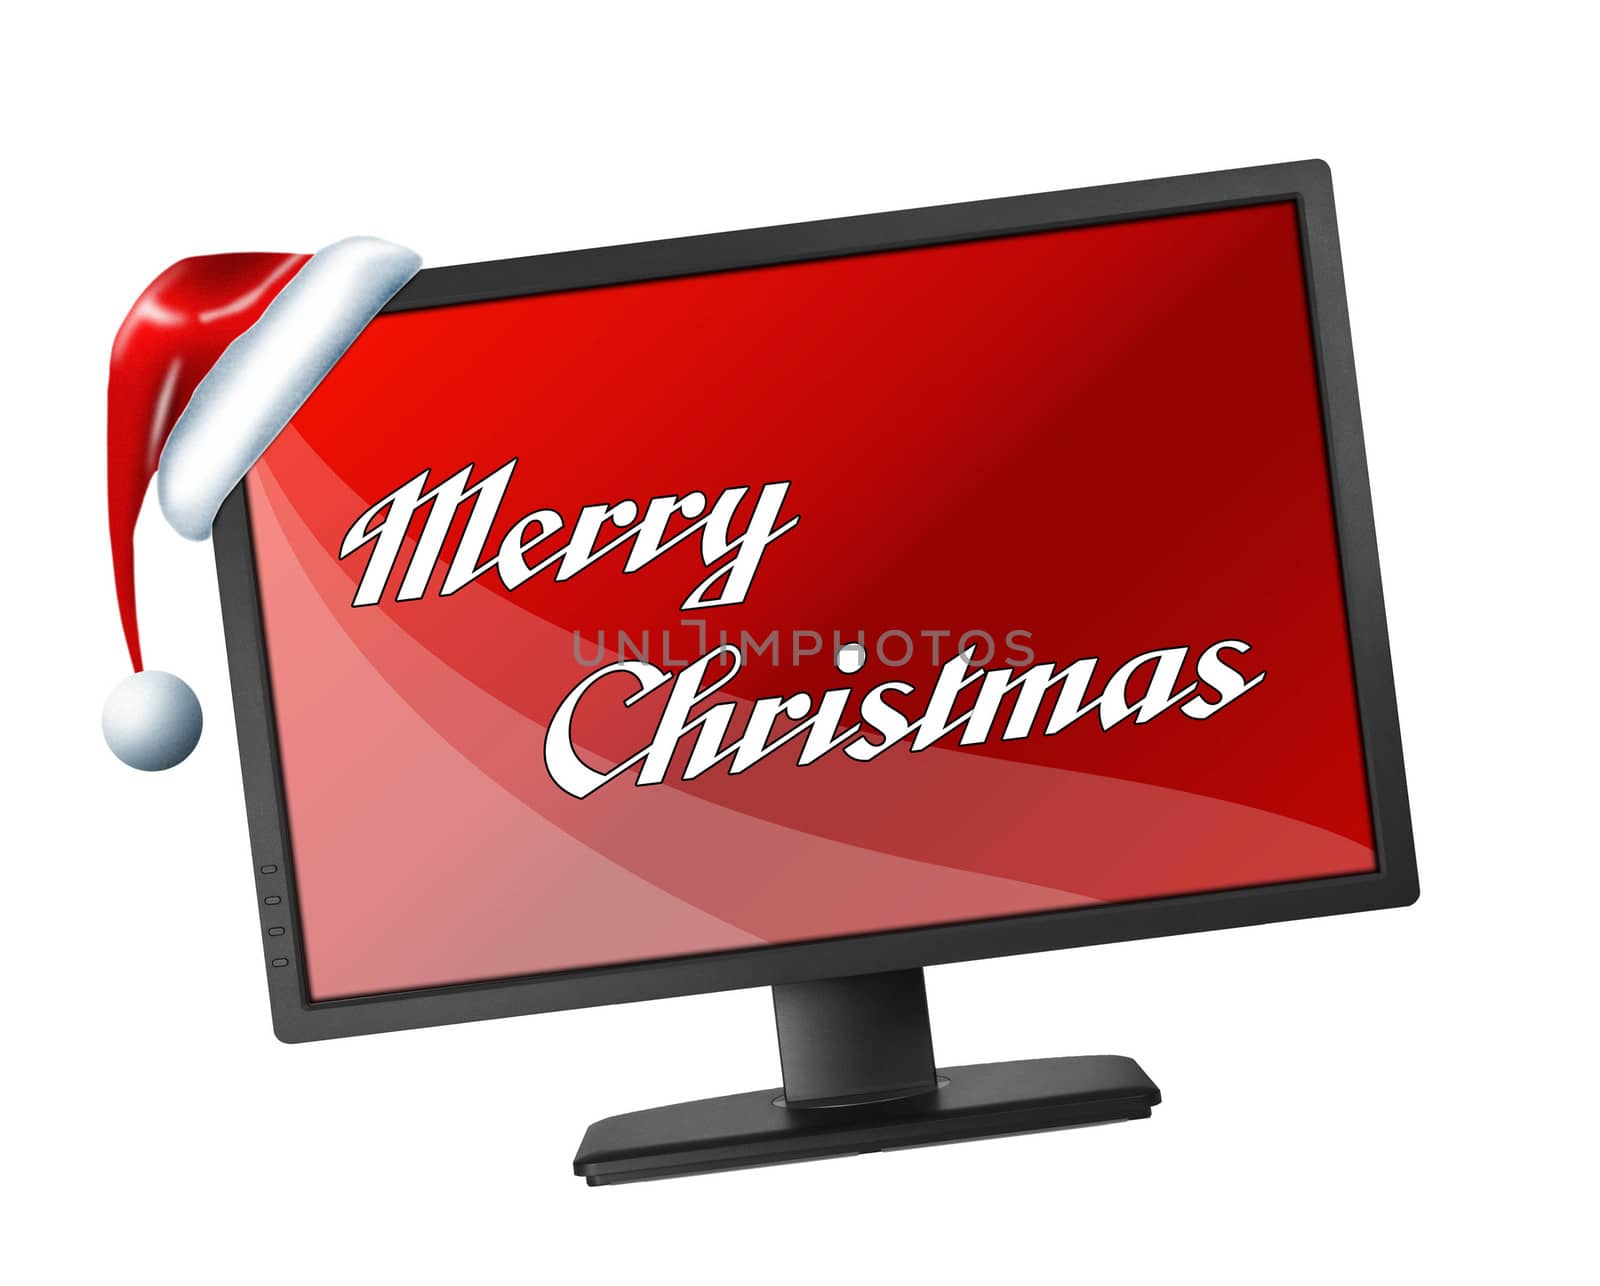 Monitor with red screen and Merry Christmas text by shutswis